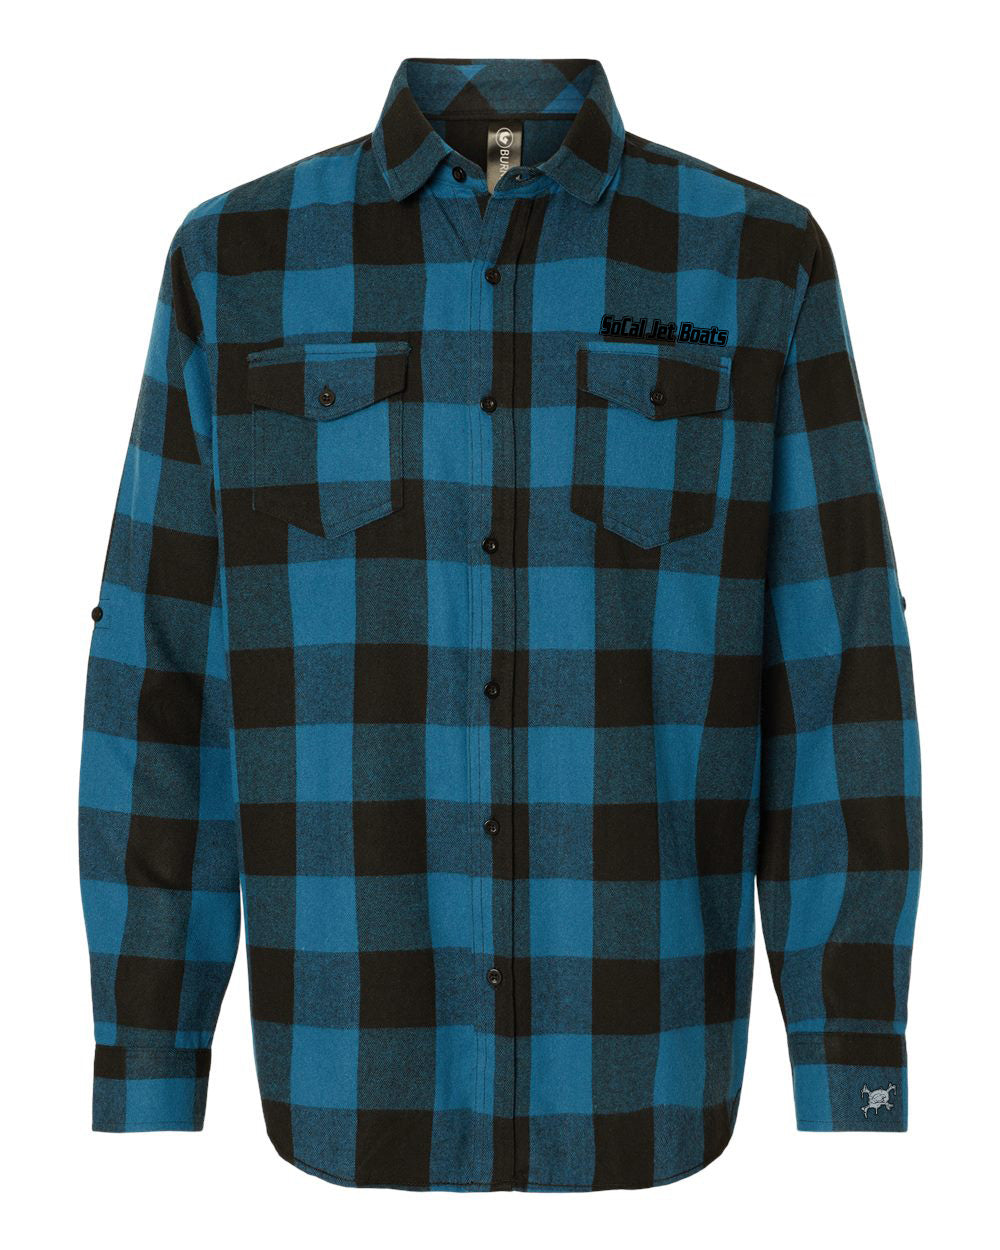 Mens Blue and Black Flannel